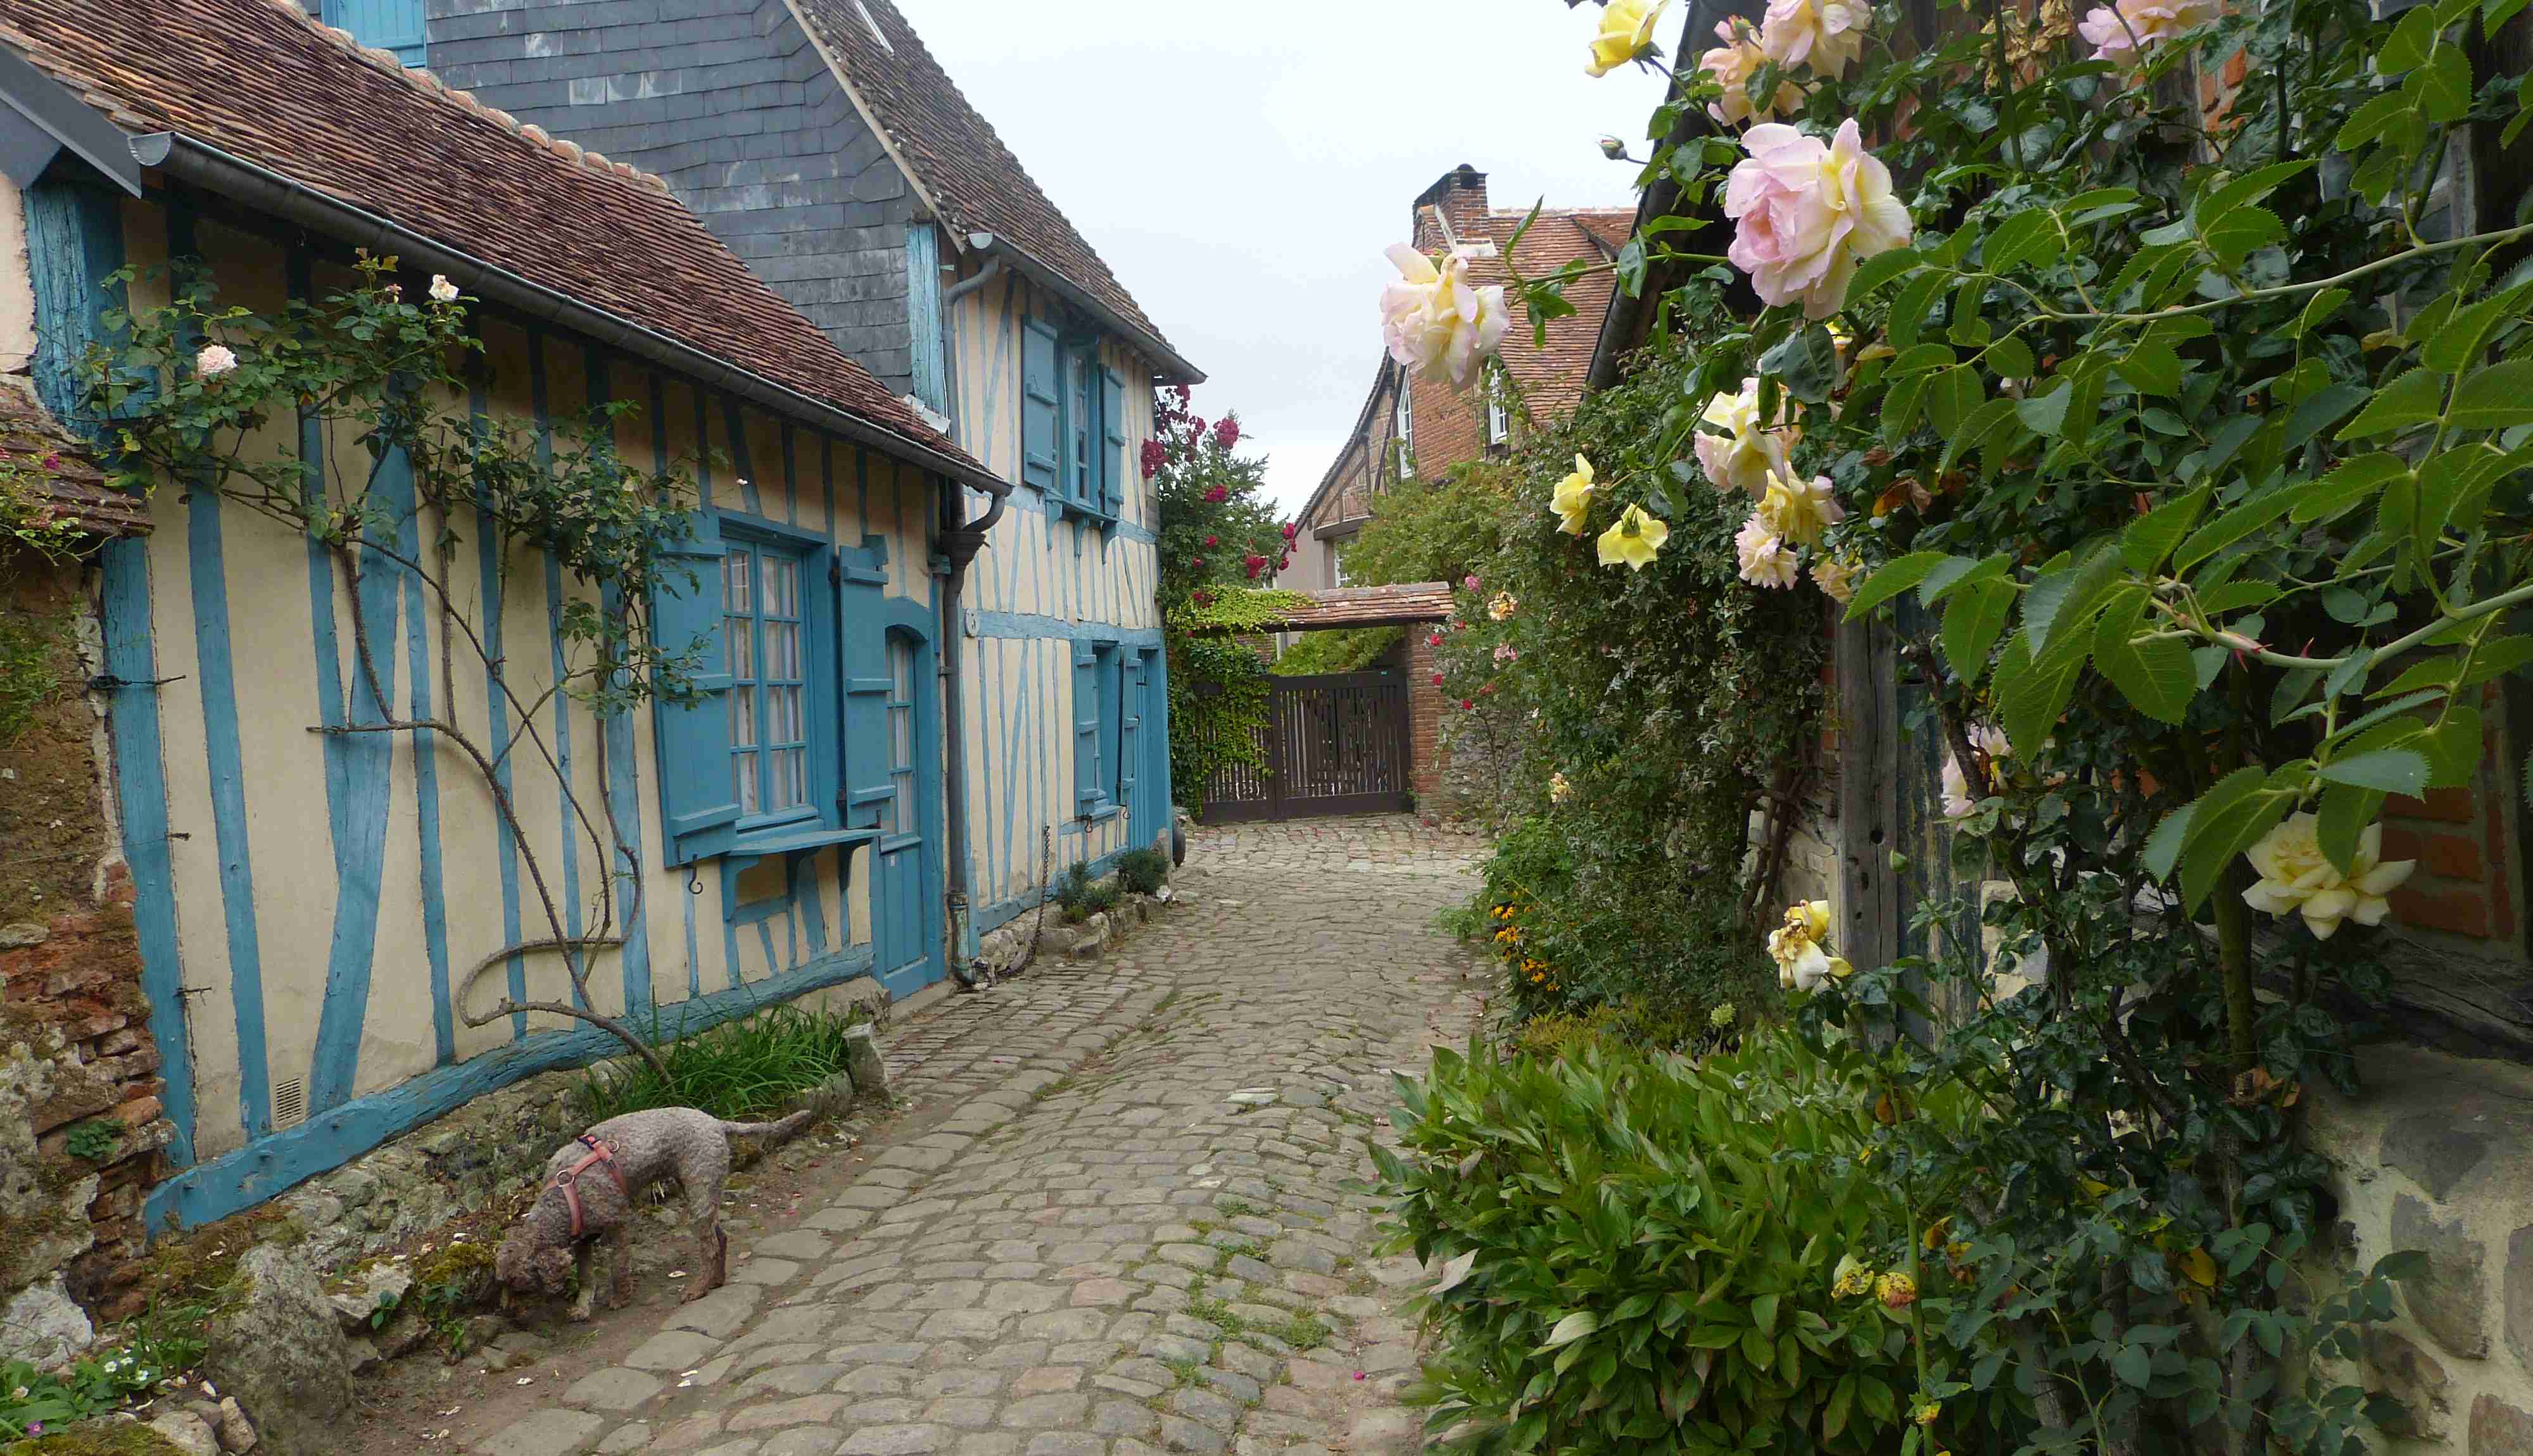 Zola sniffs, probably some dog pee, along a narrow cobbled lane in Gerberoy